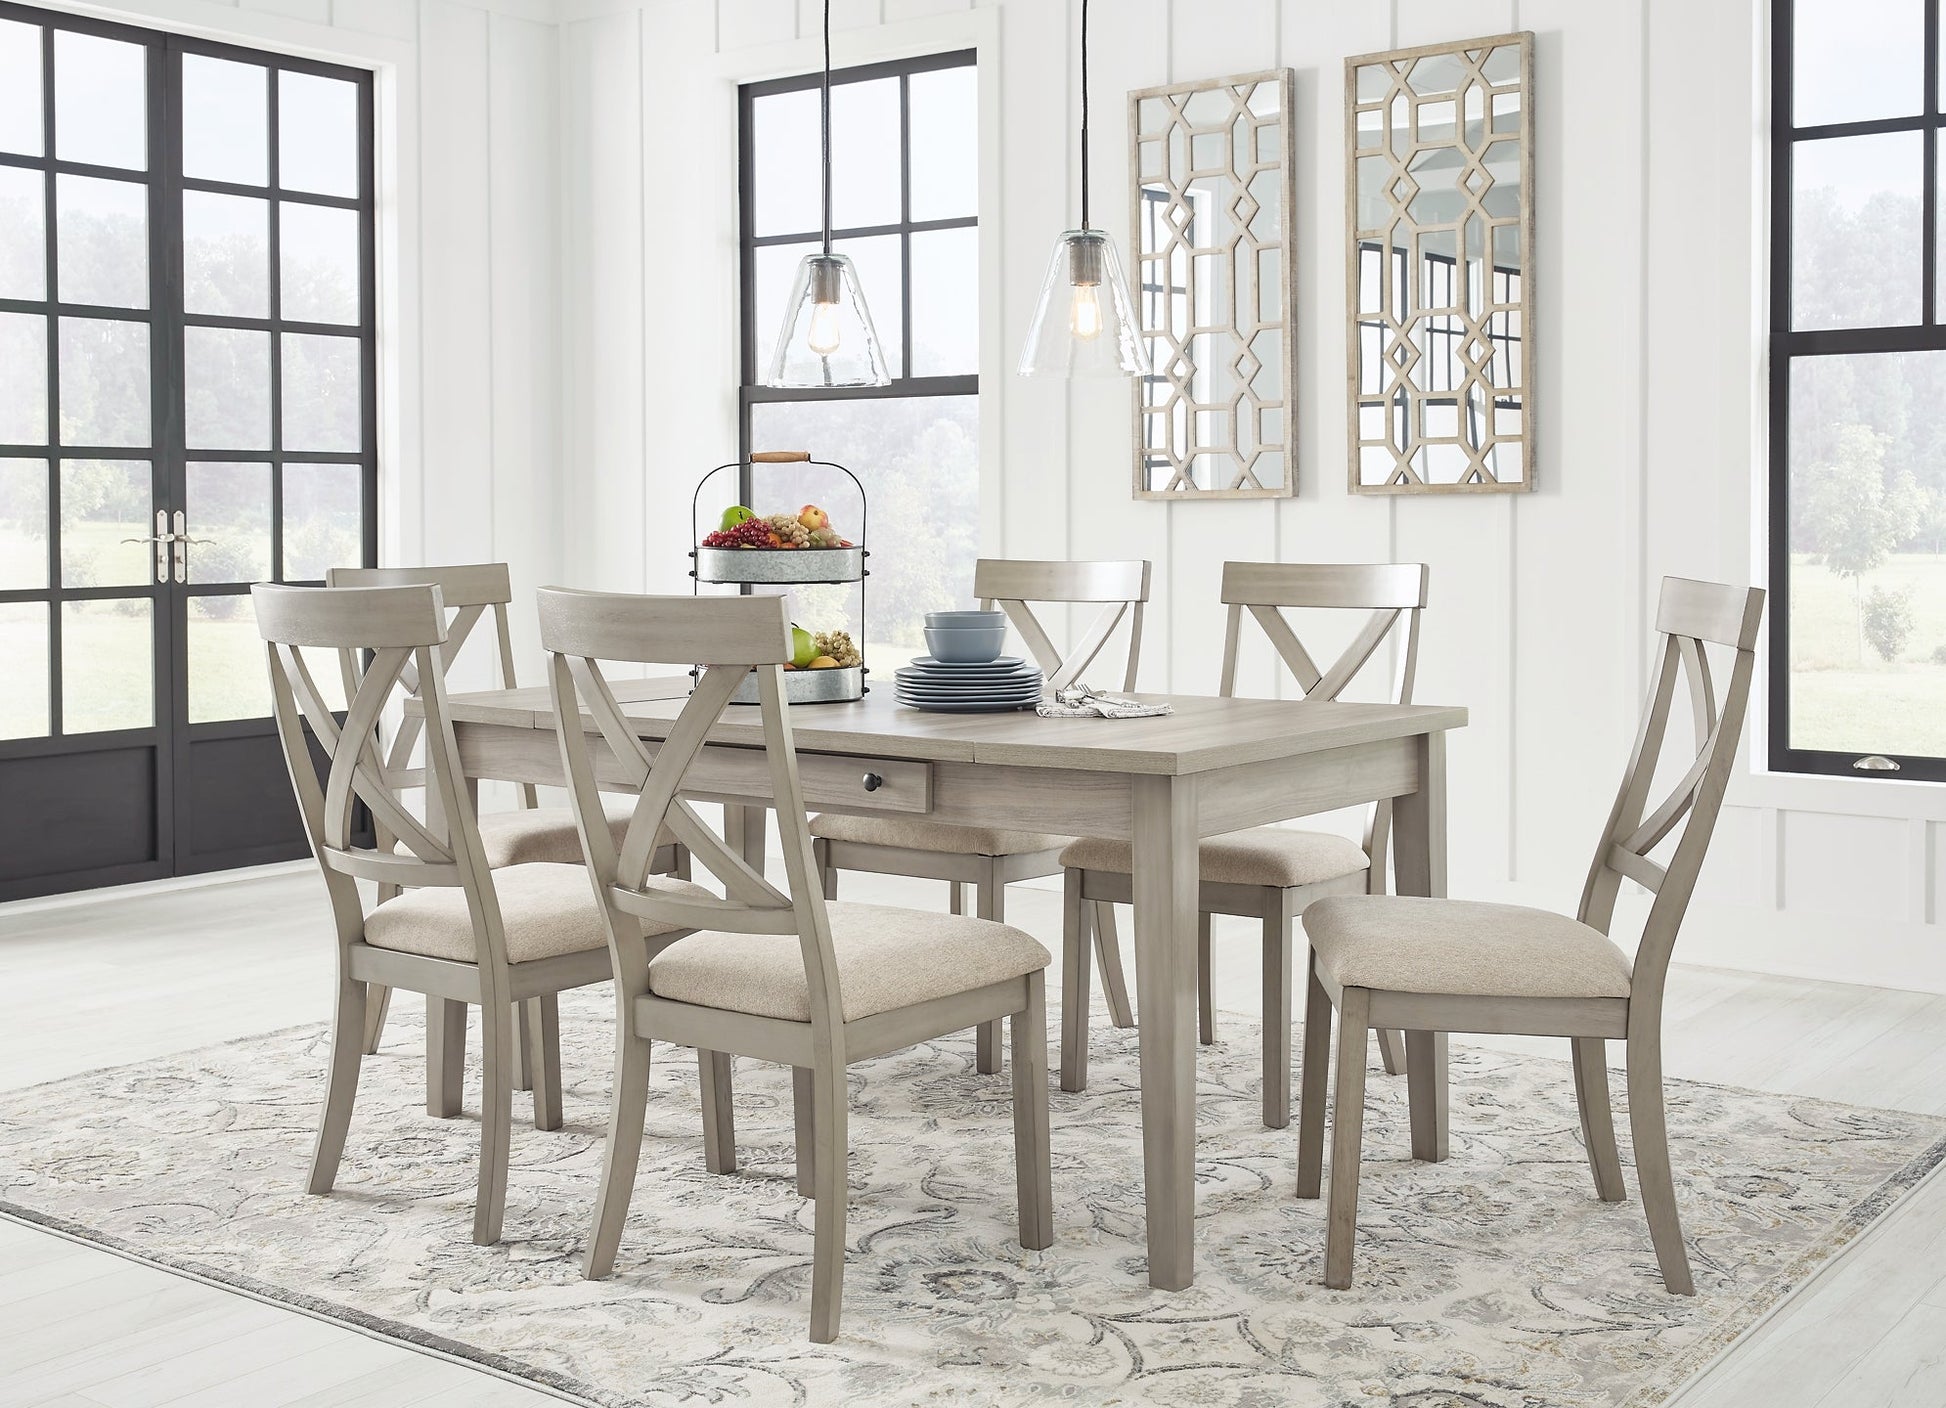 Parellen Dining Table and 6 Chairs Rent Wise Rent To Own Jacksonville, Florida